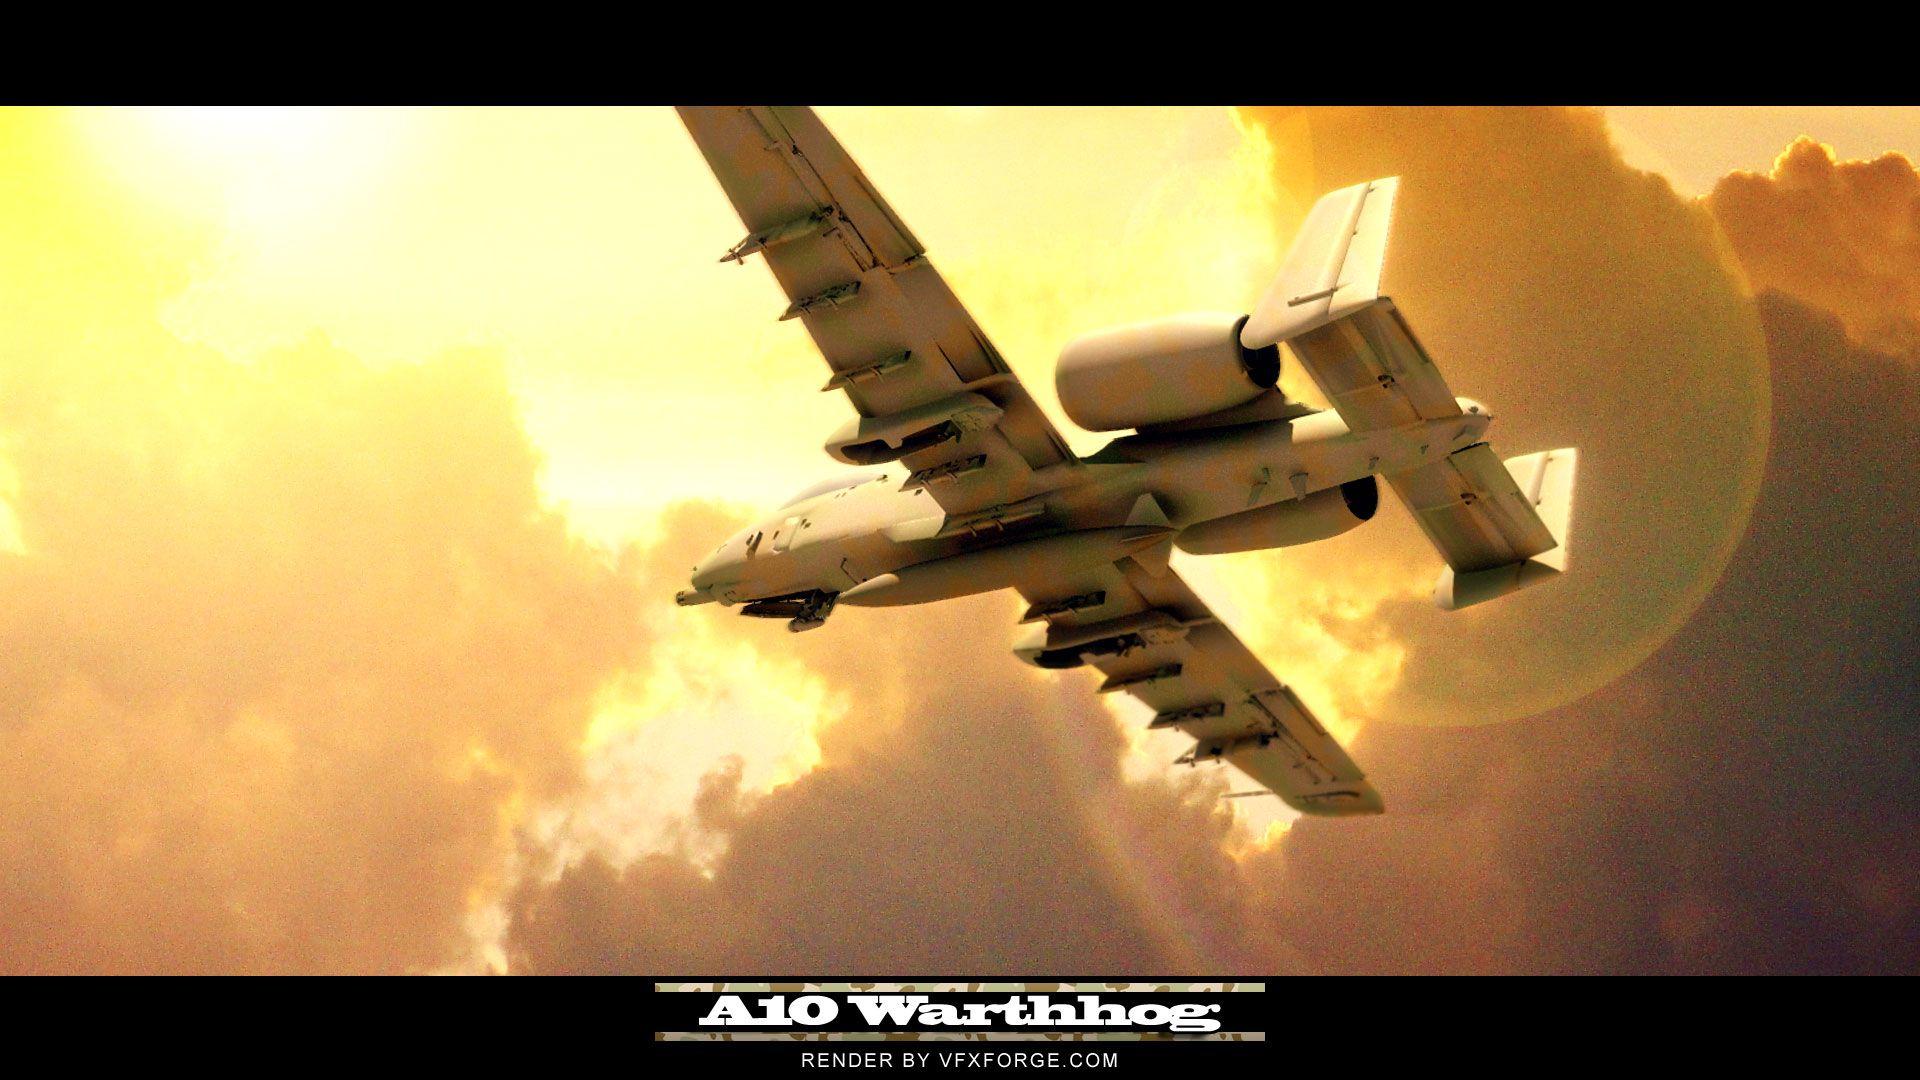 image For > A10 Warthog